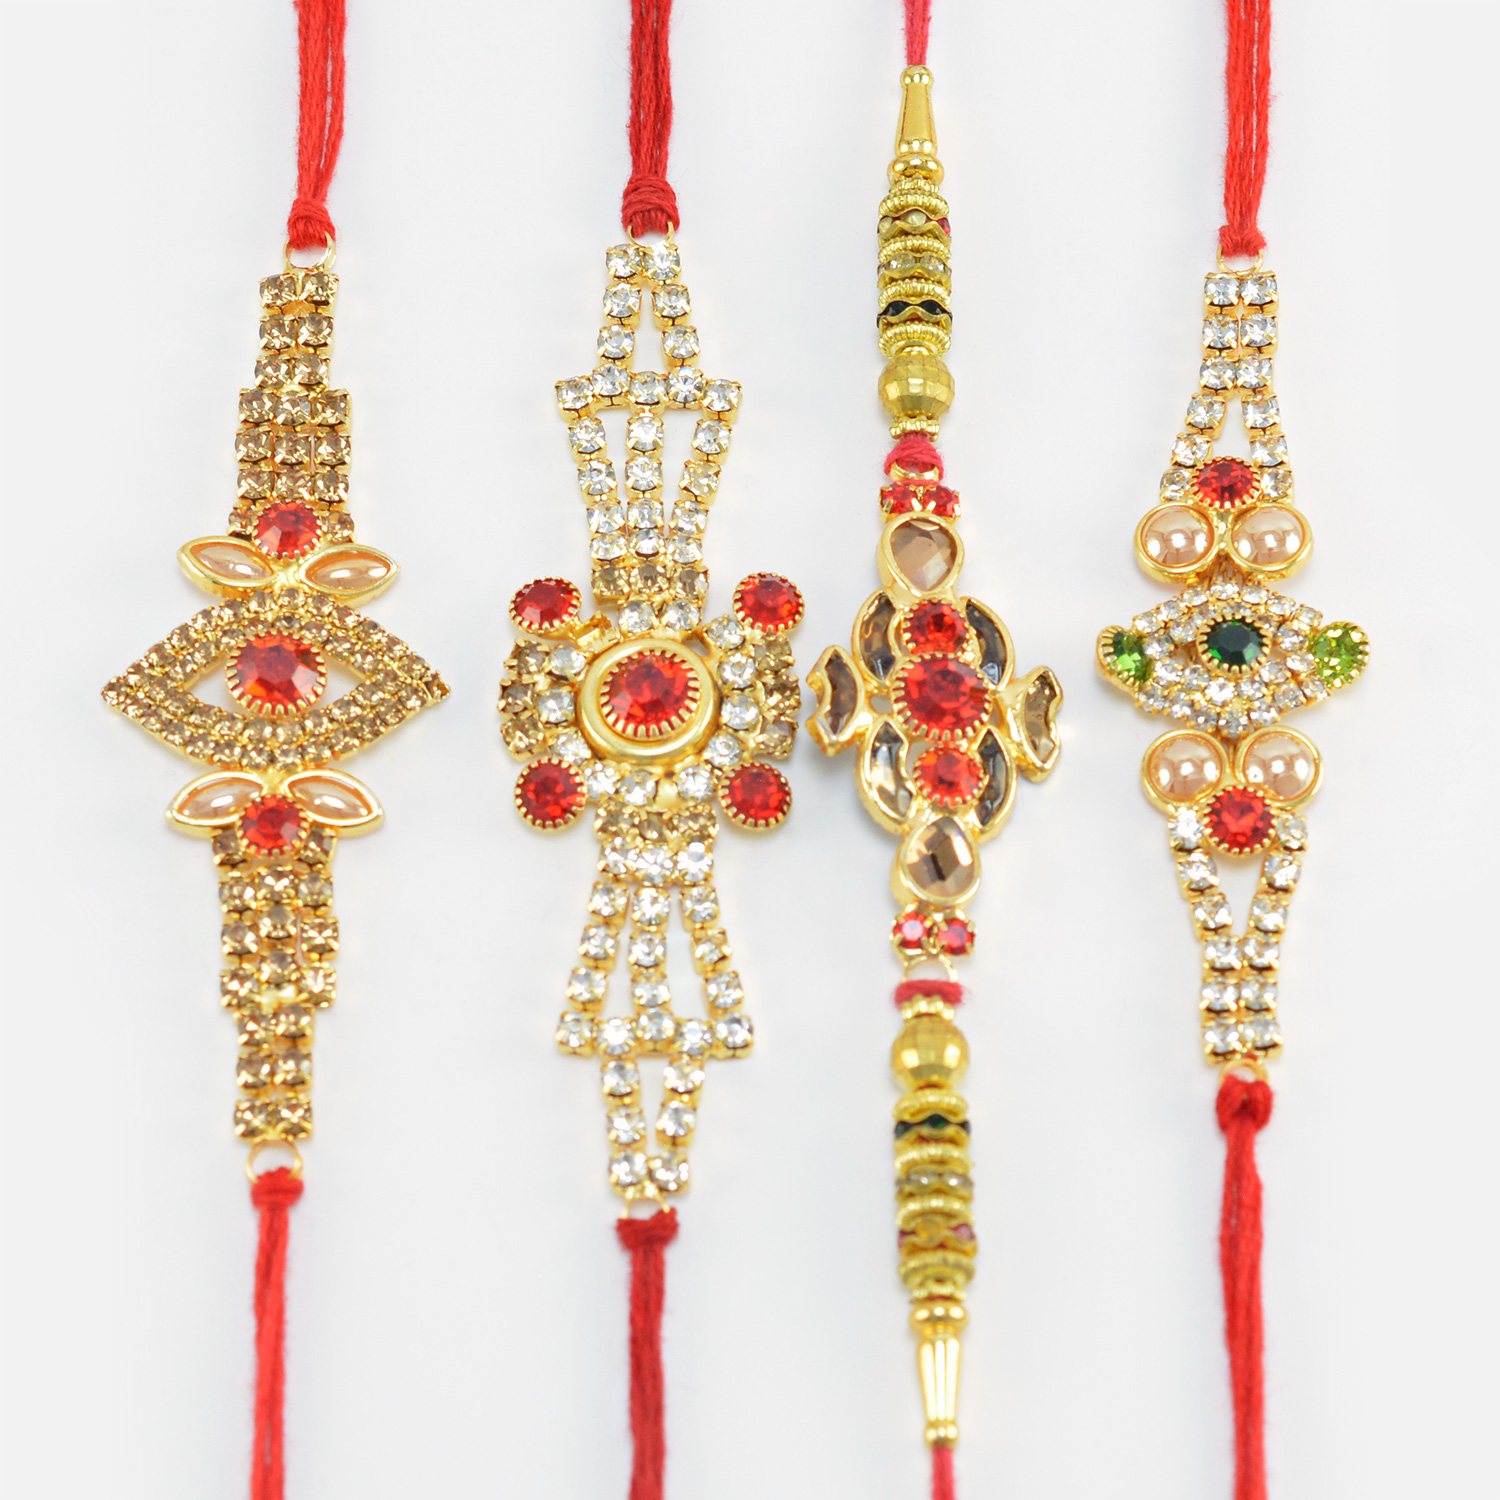 Perl Studded Rich Looking Unique Pattern Marvelous Shining Rakhi for Brothers